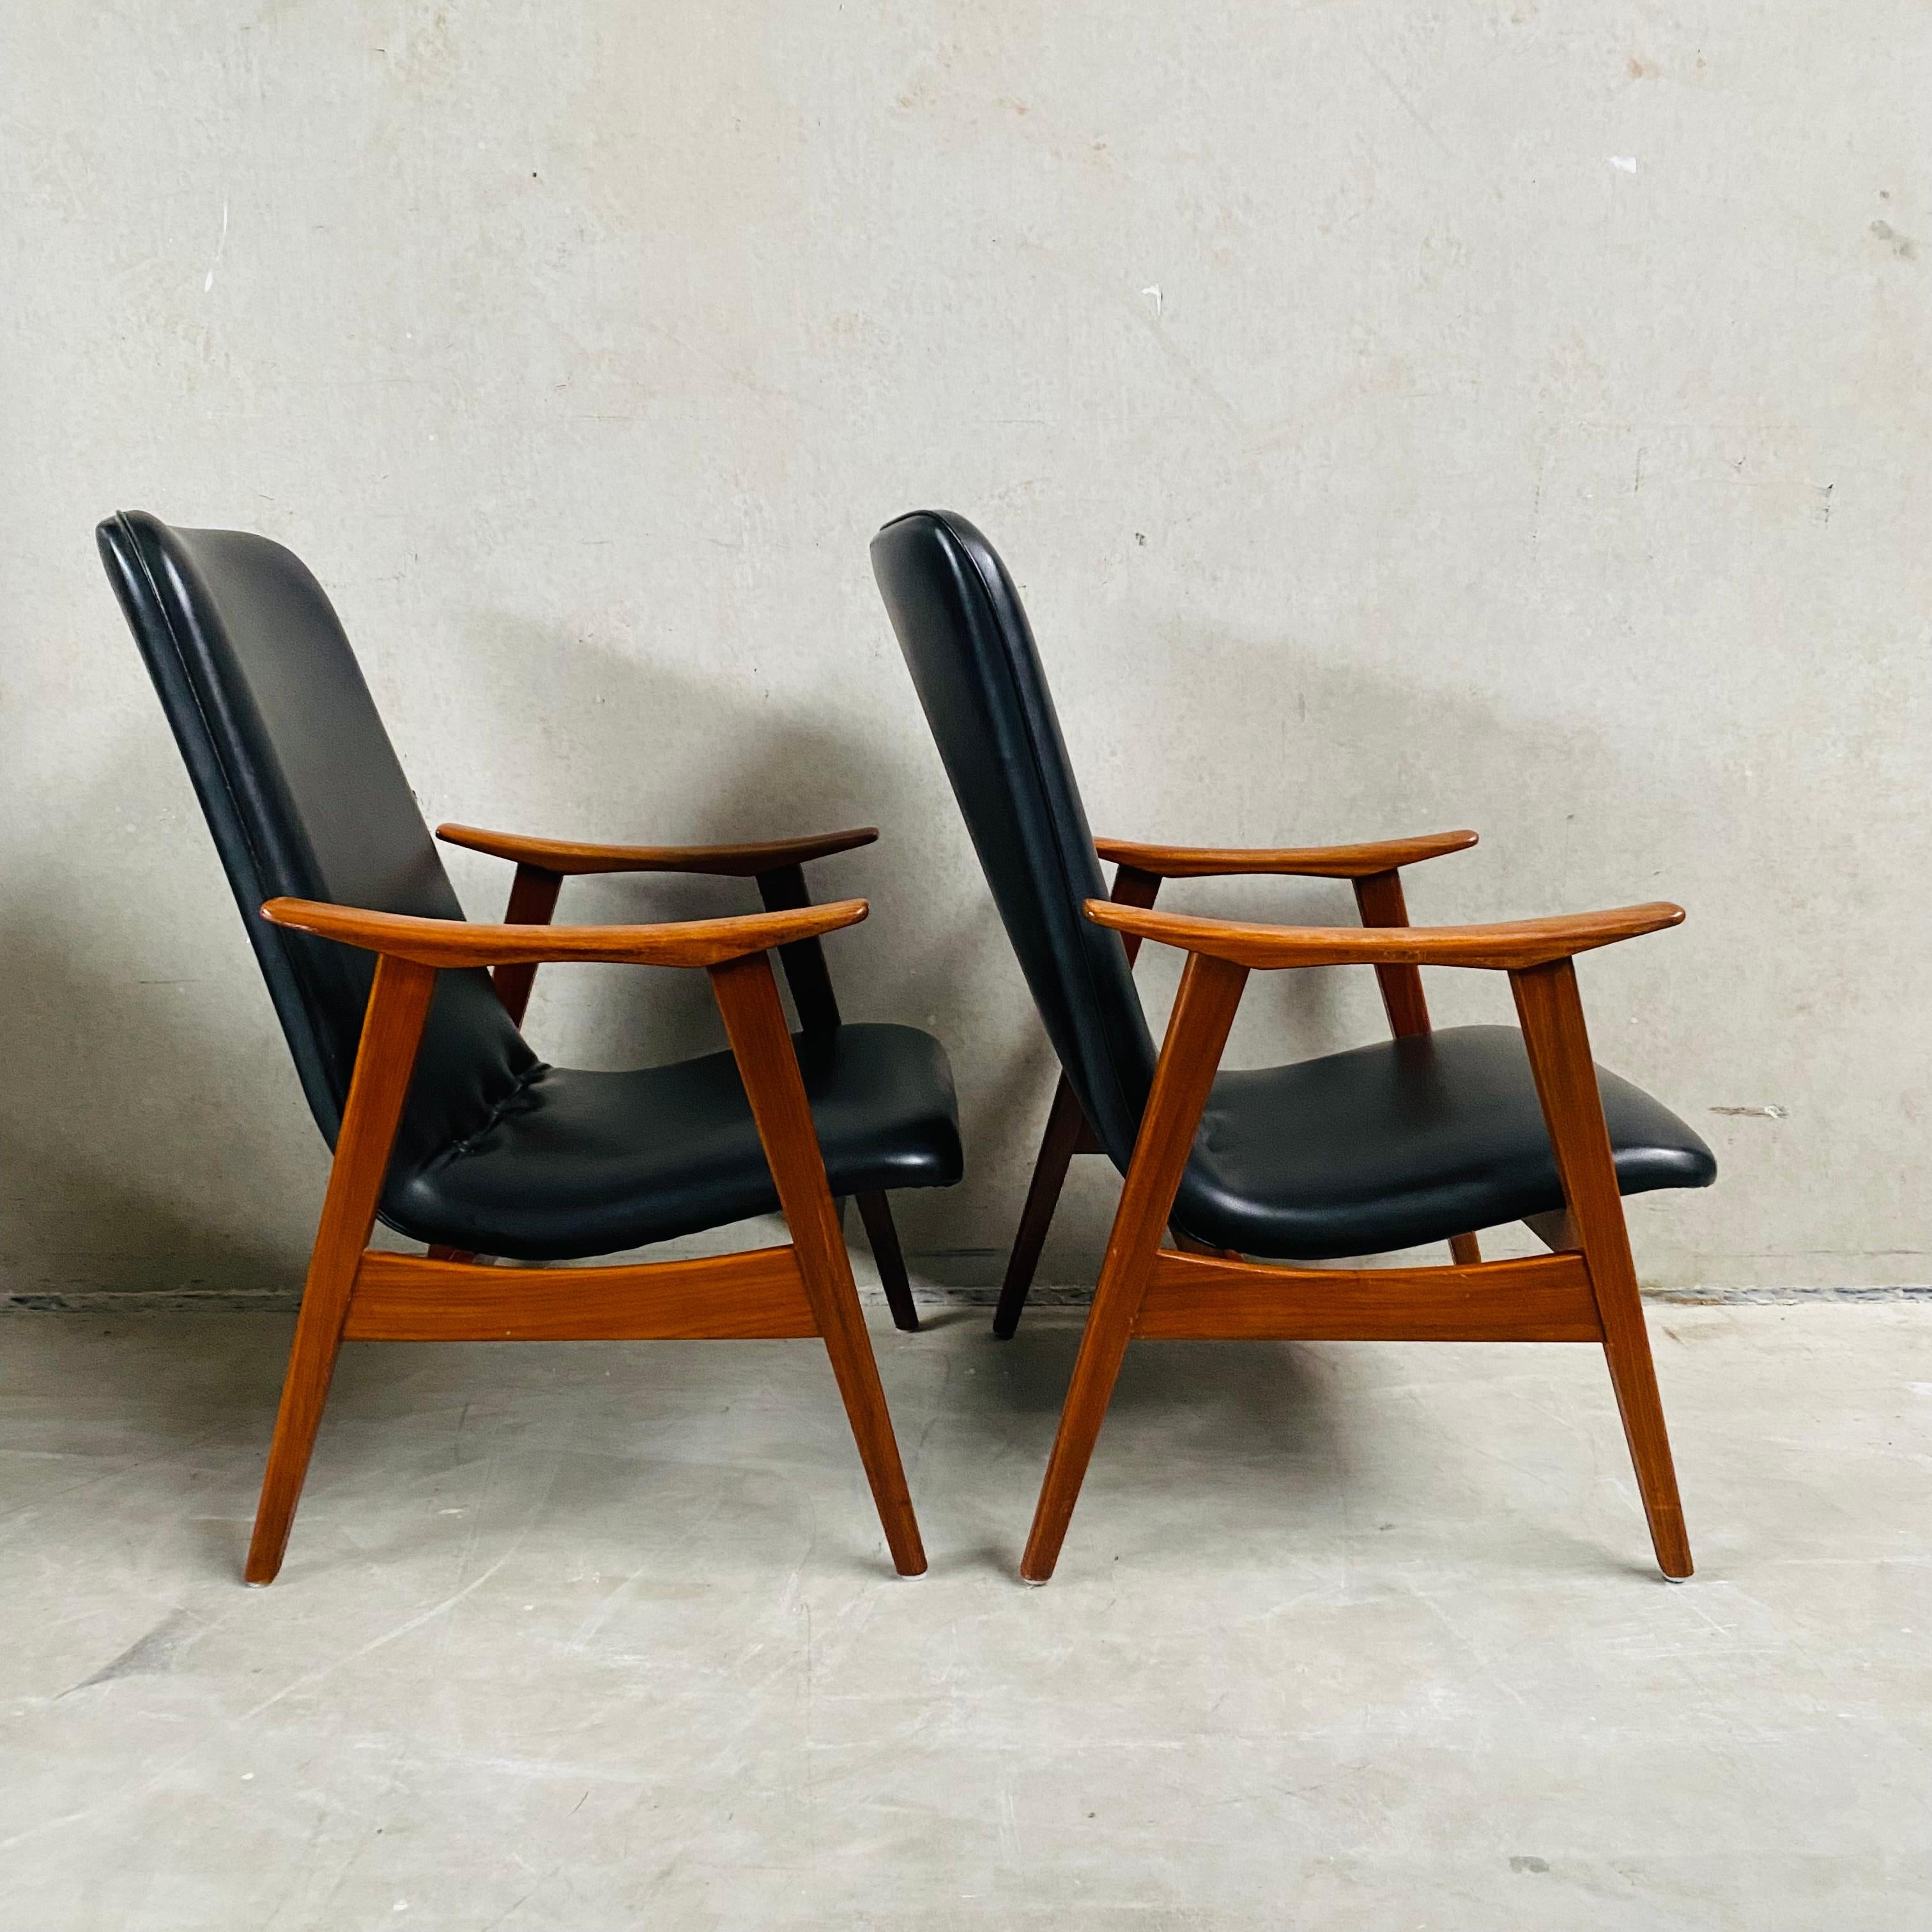 Set of Two Louis Van Teeffelen for Webe Lounge Chairs, Netherlands, 1960s In Good Condition For Sale In DE MEERN, NL